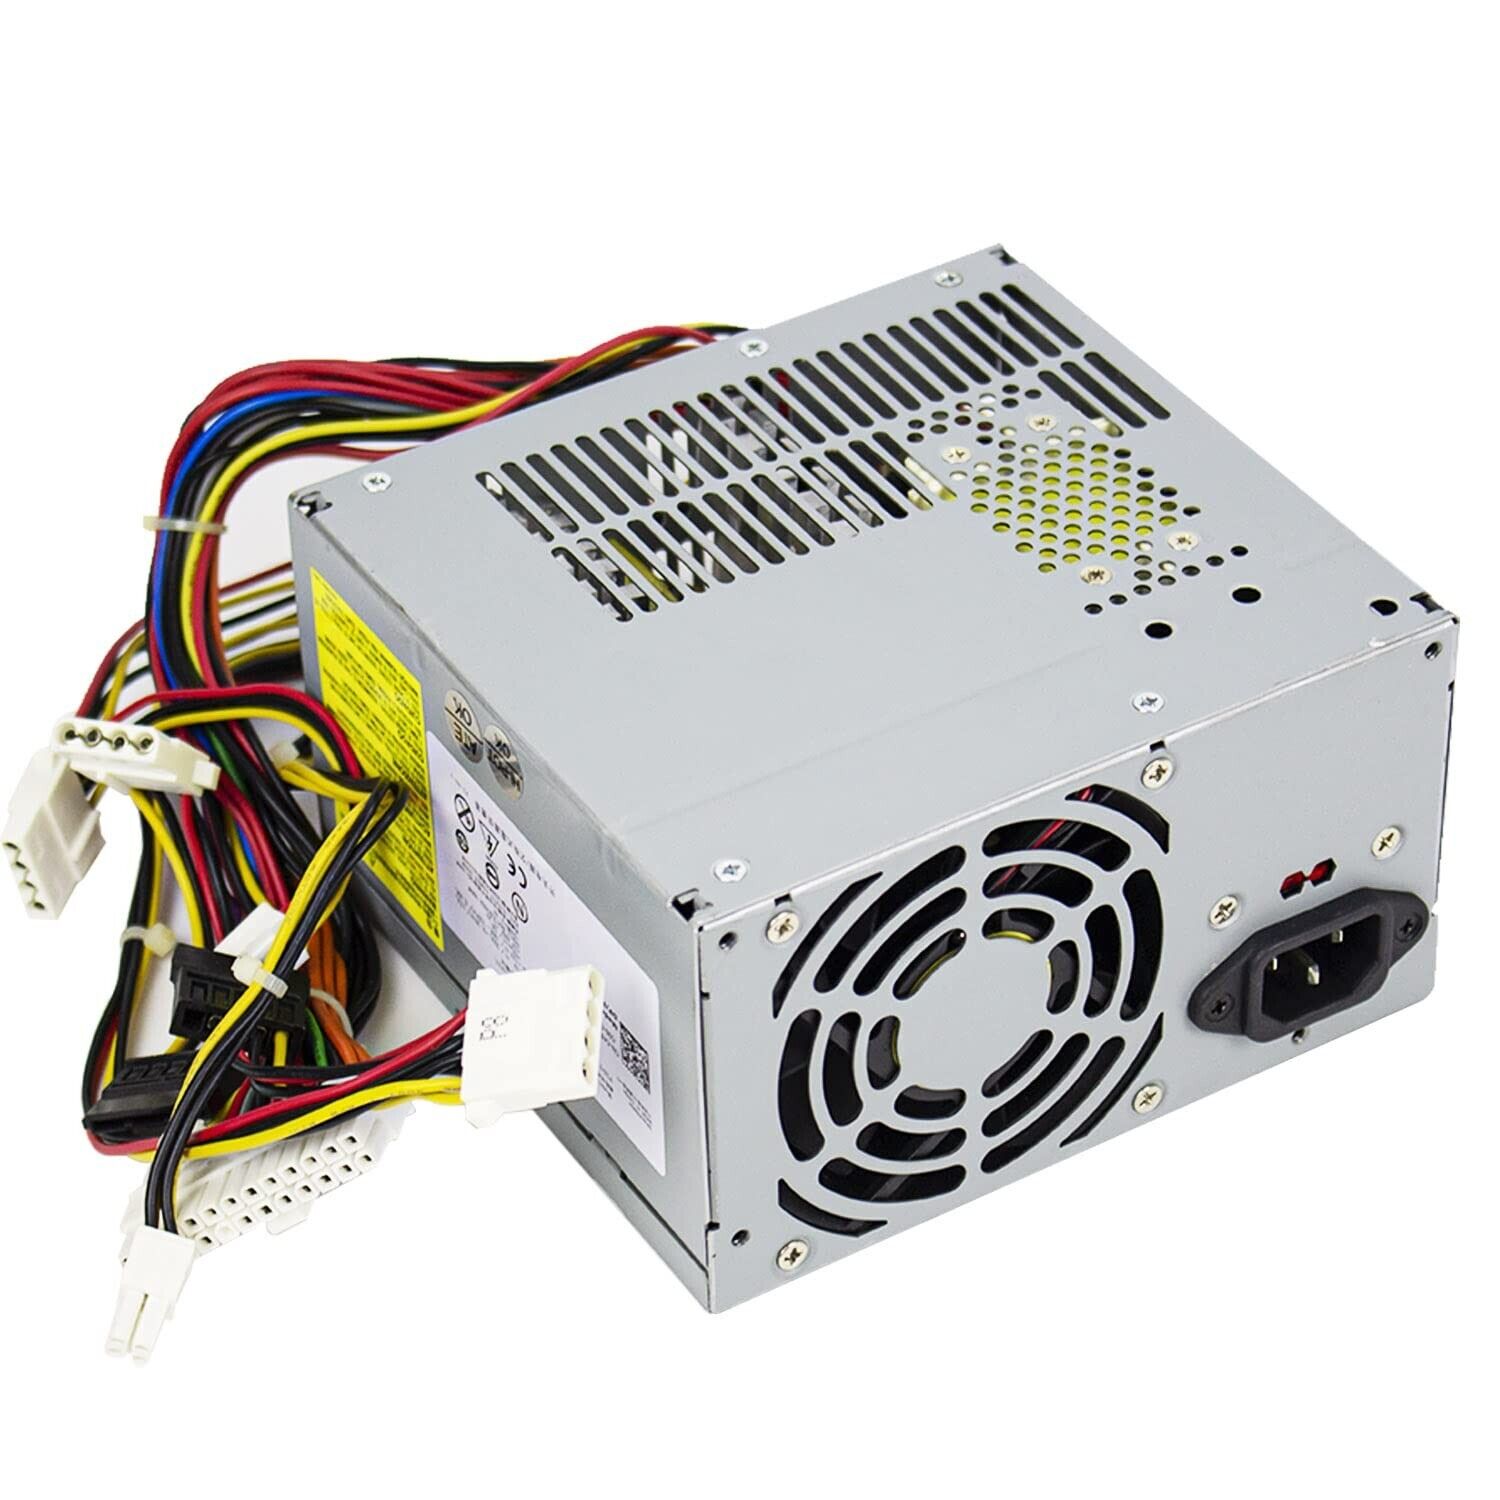 Upgraded 300W P3017F3P LF J036N XW600 Watt Replacement Power Supply for Dell ...